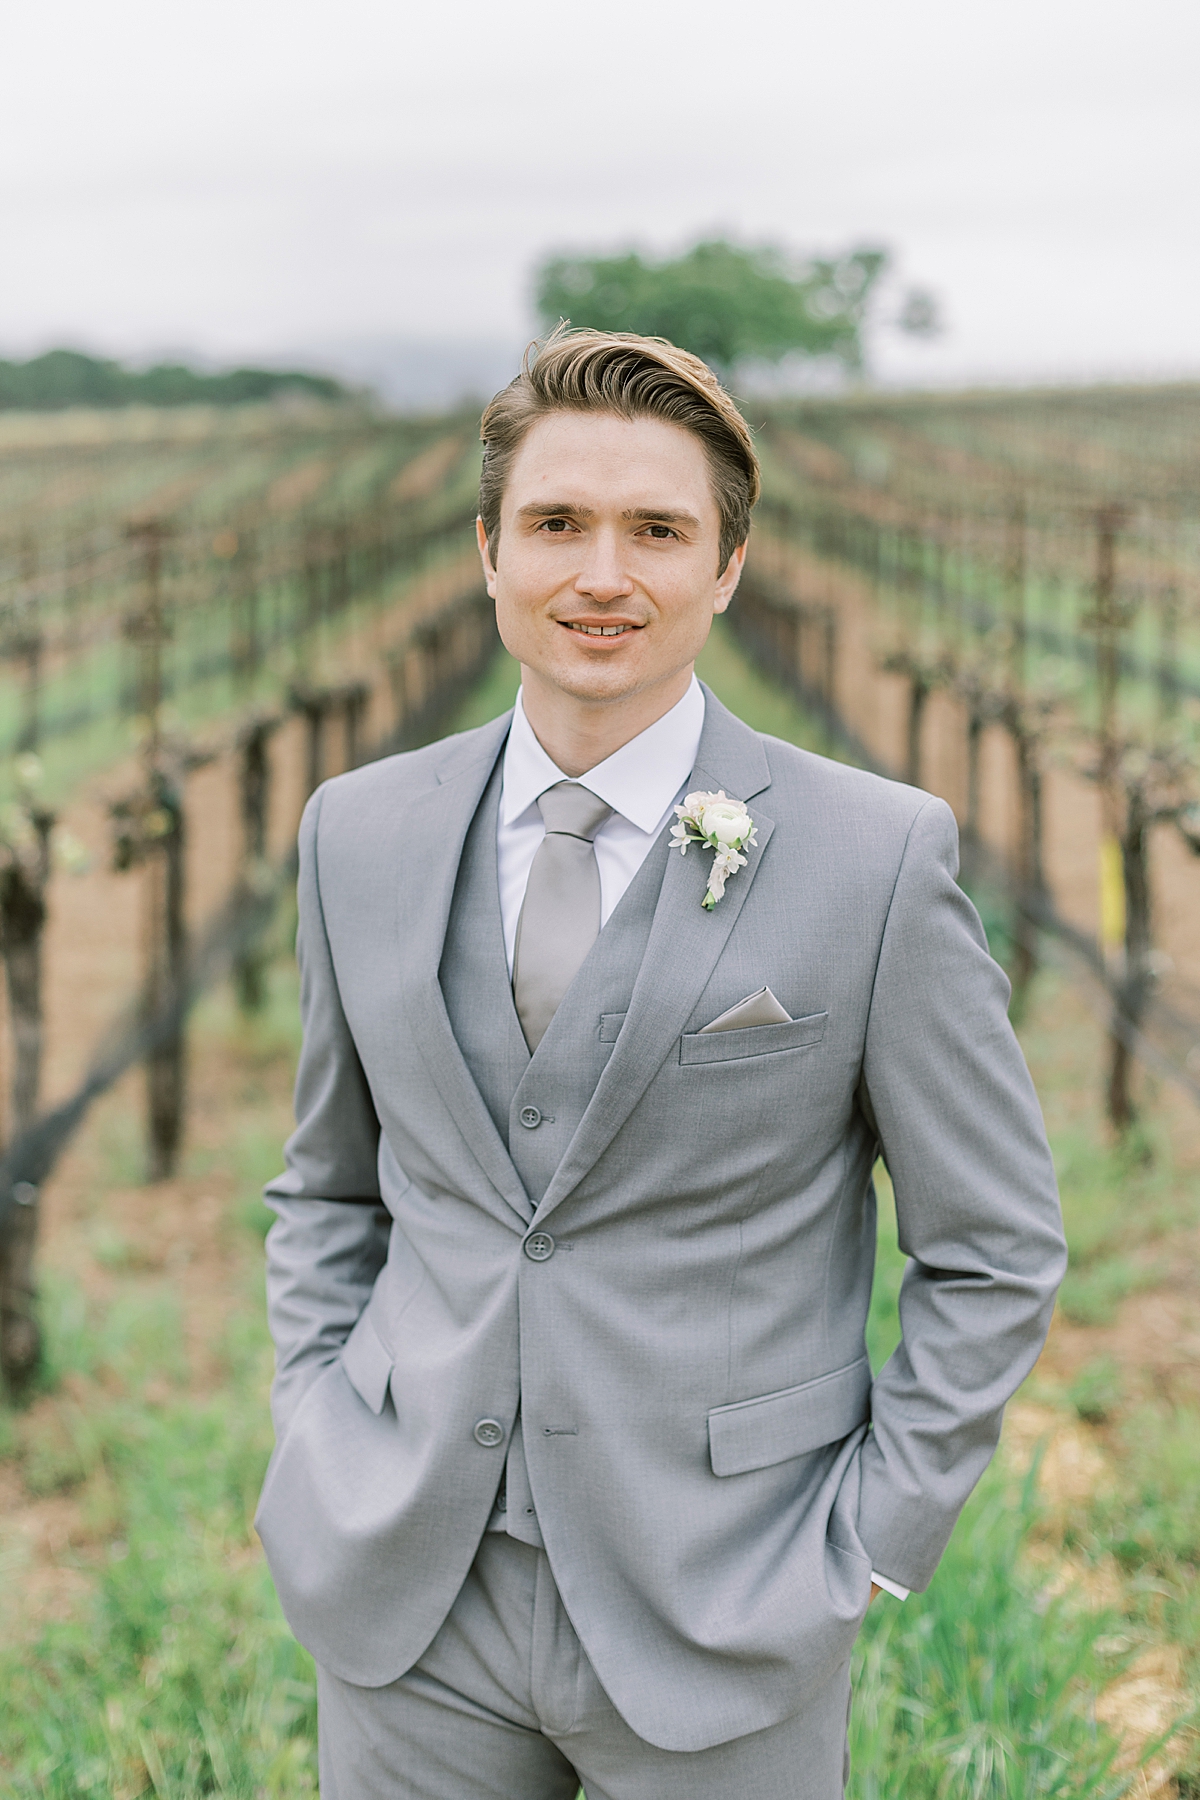 The groom smiling at the camera with rows of vineyards behind him.